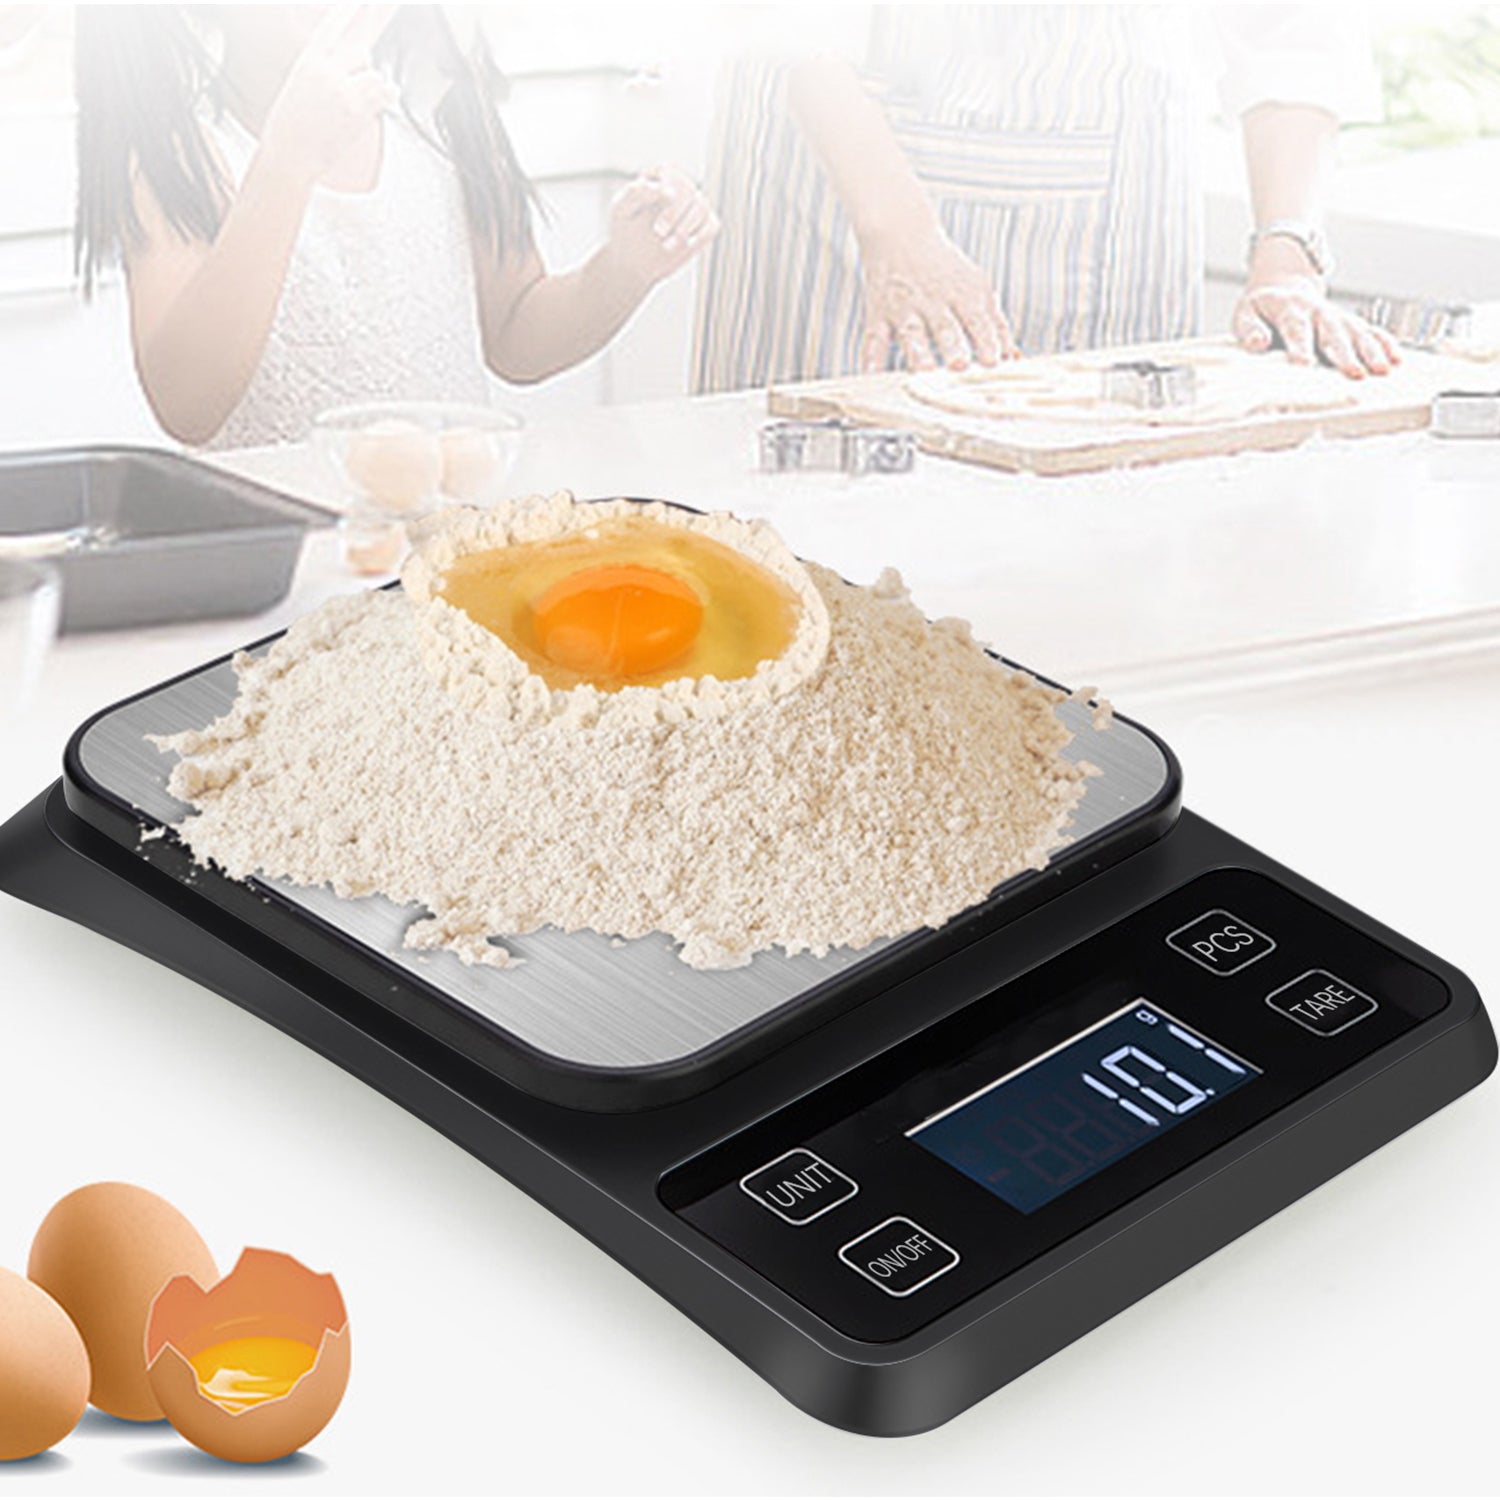 Weighing and Measuring Food for Beginners